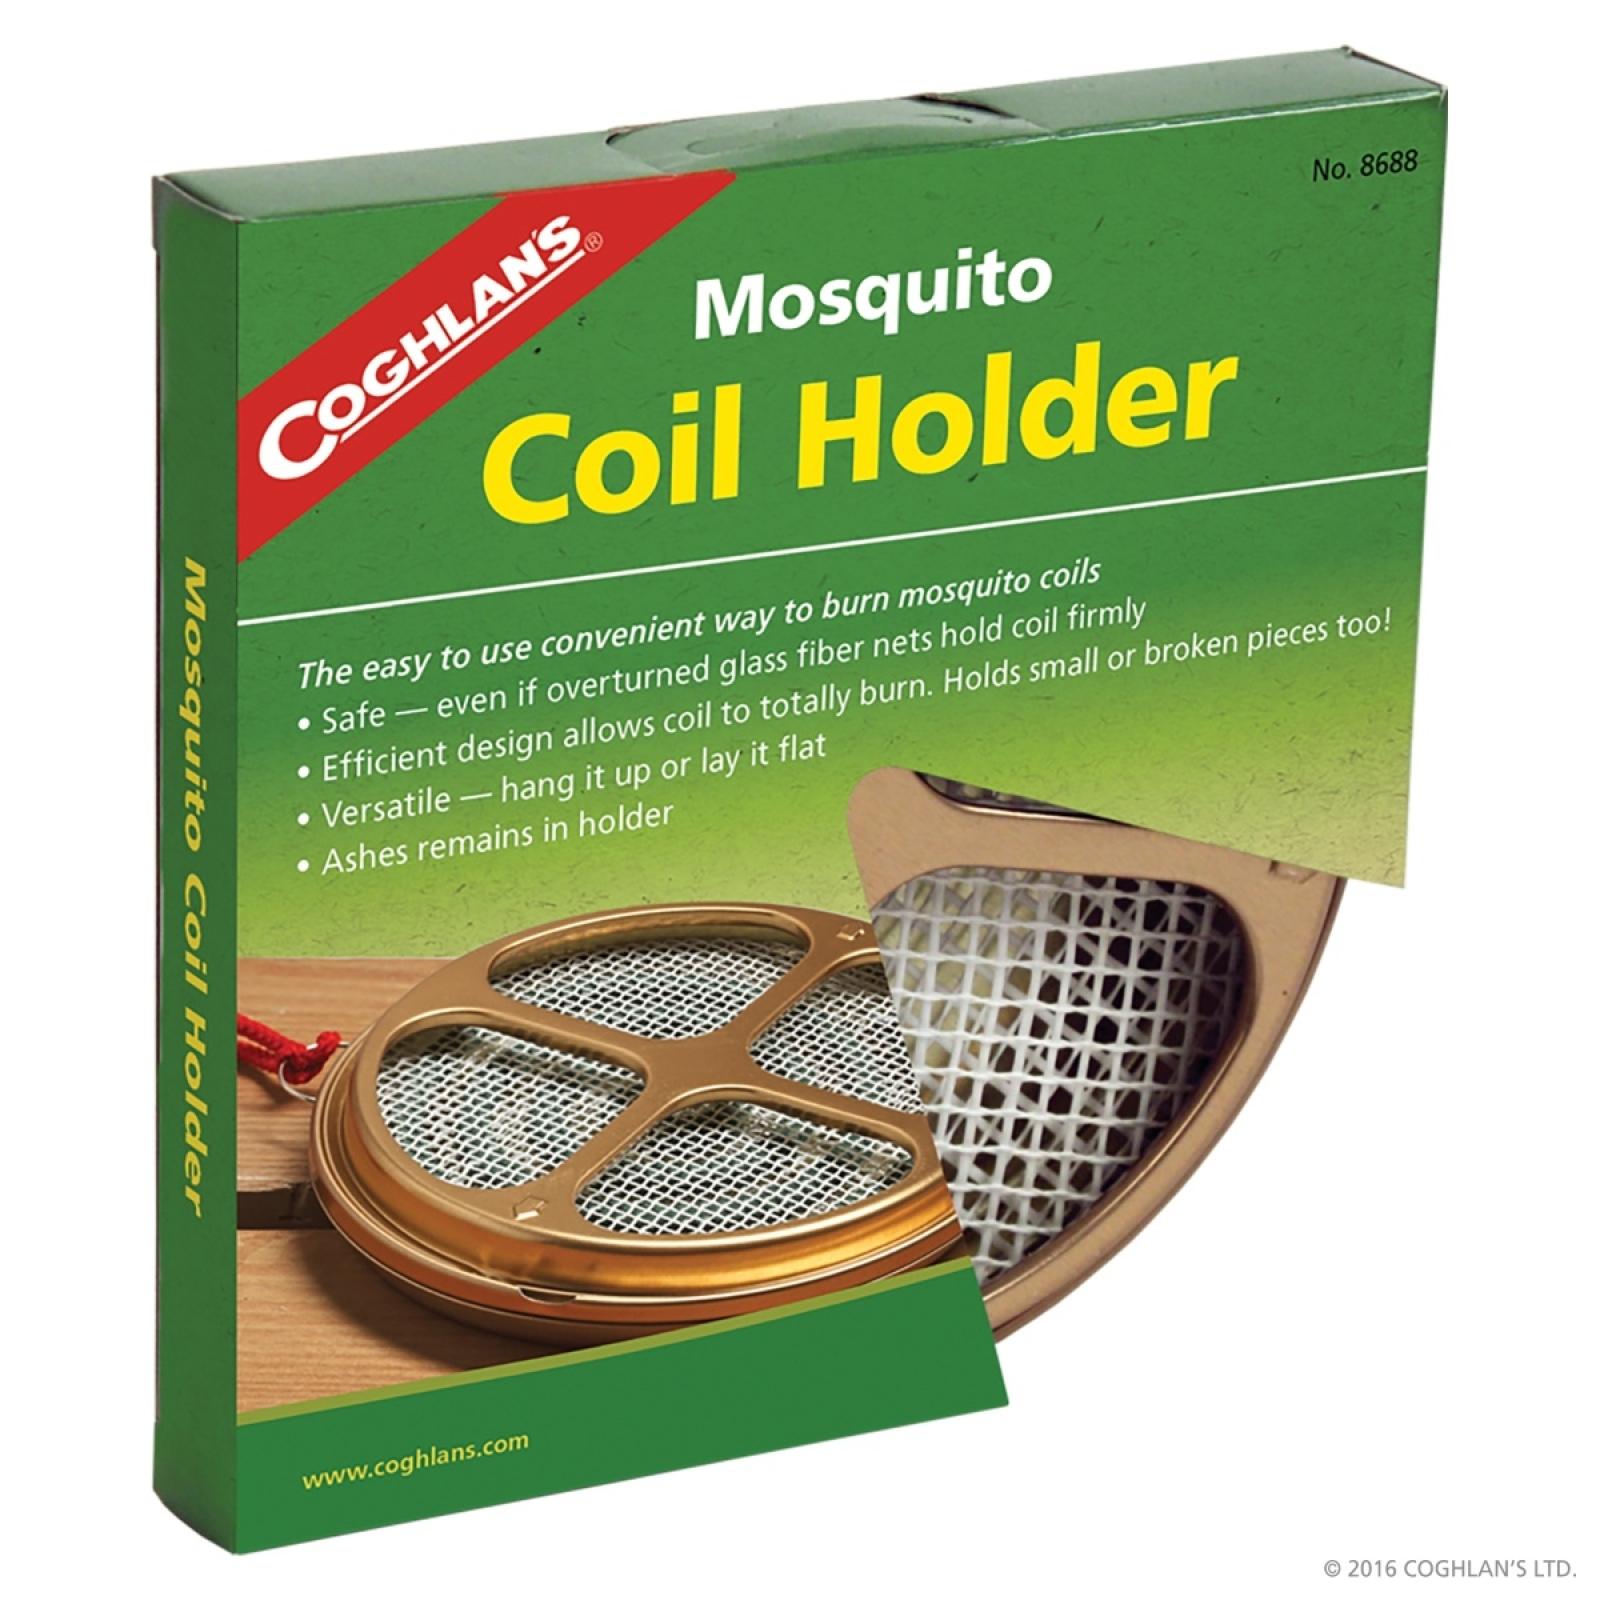 Coghlan Mosquito Coil Holder